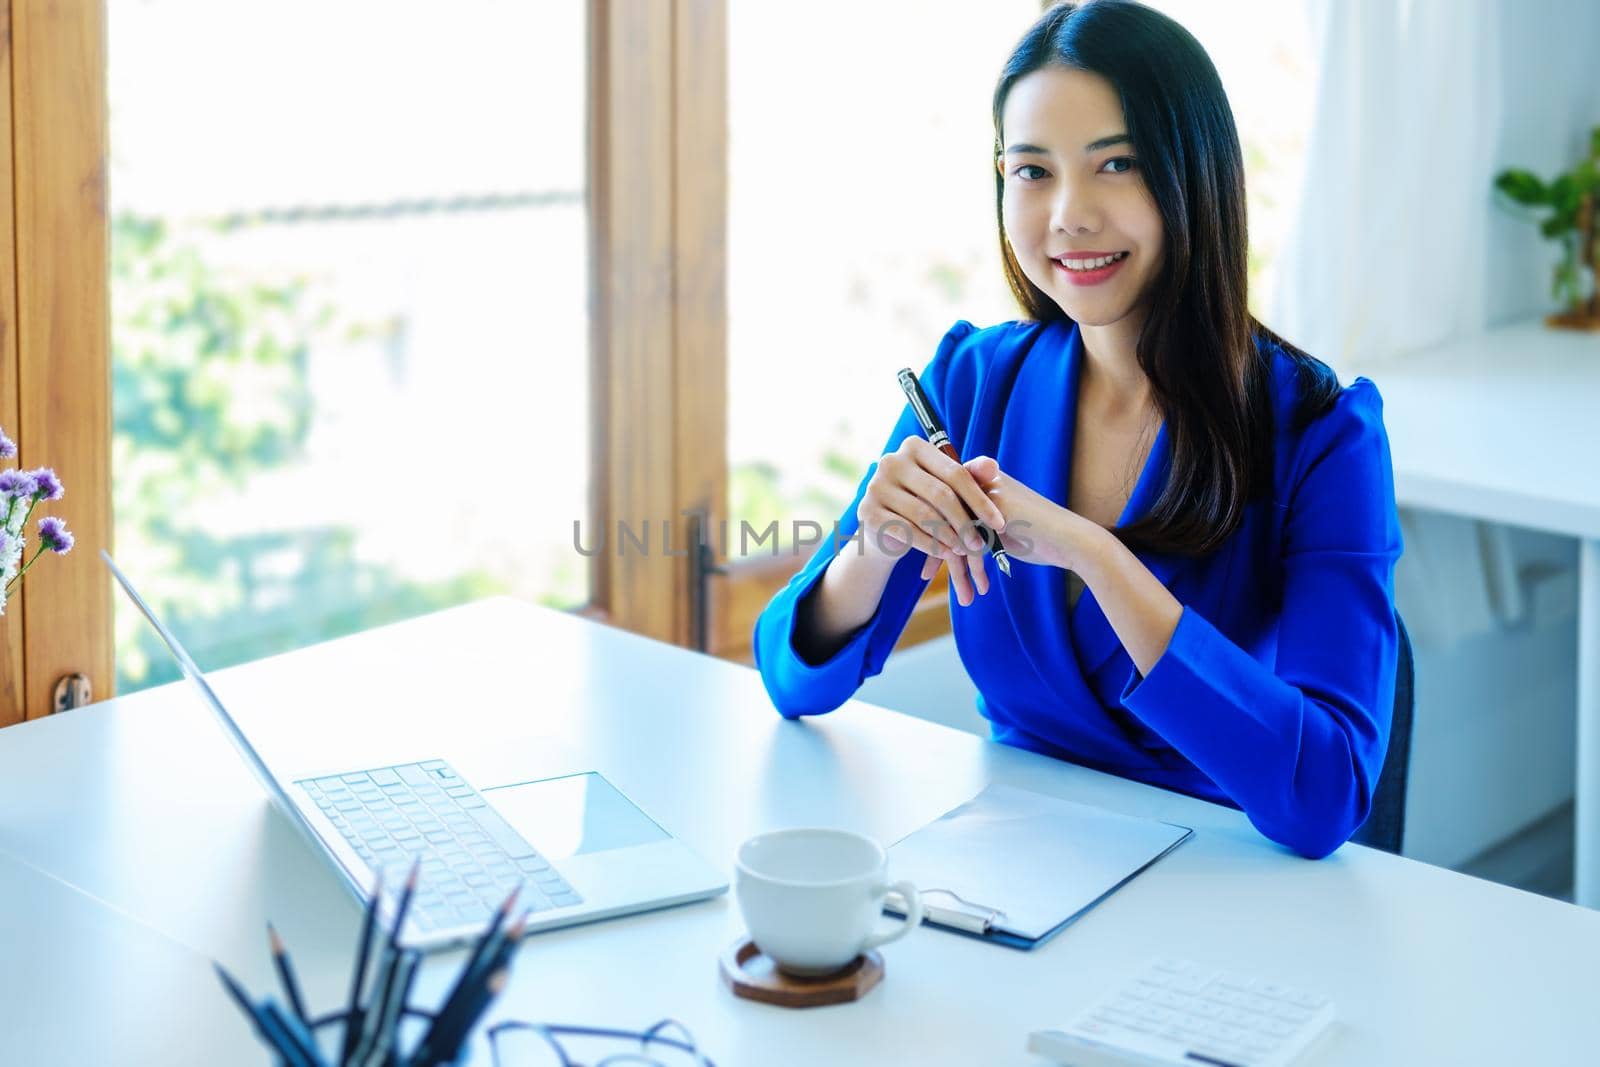 An Asian entrepreneur or businesswoman shows a smiling face while working with using computer on a wooden table